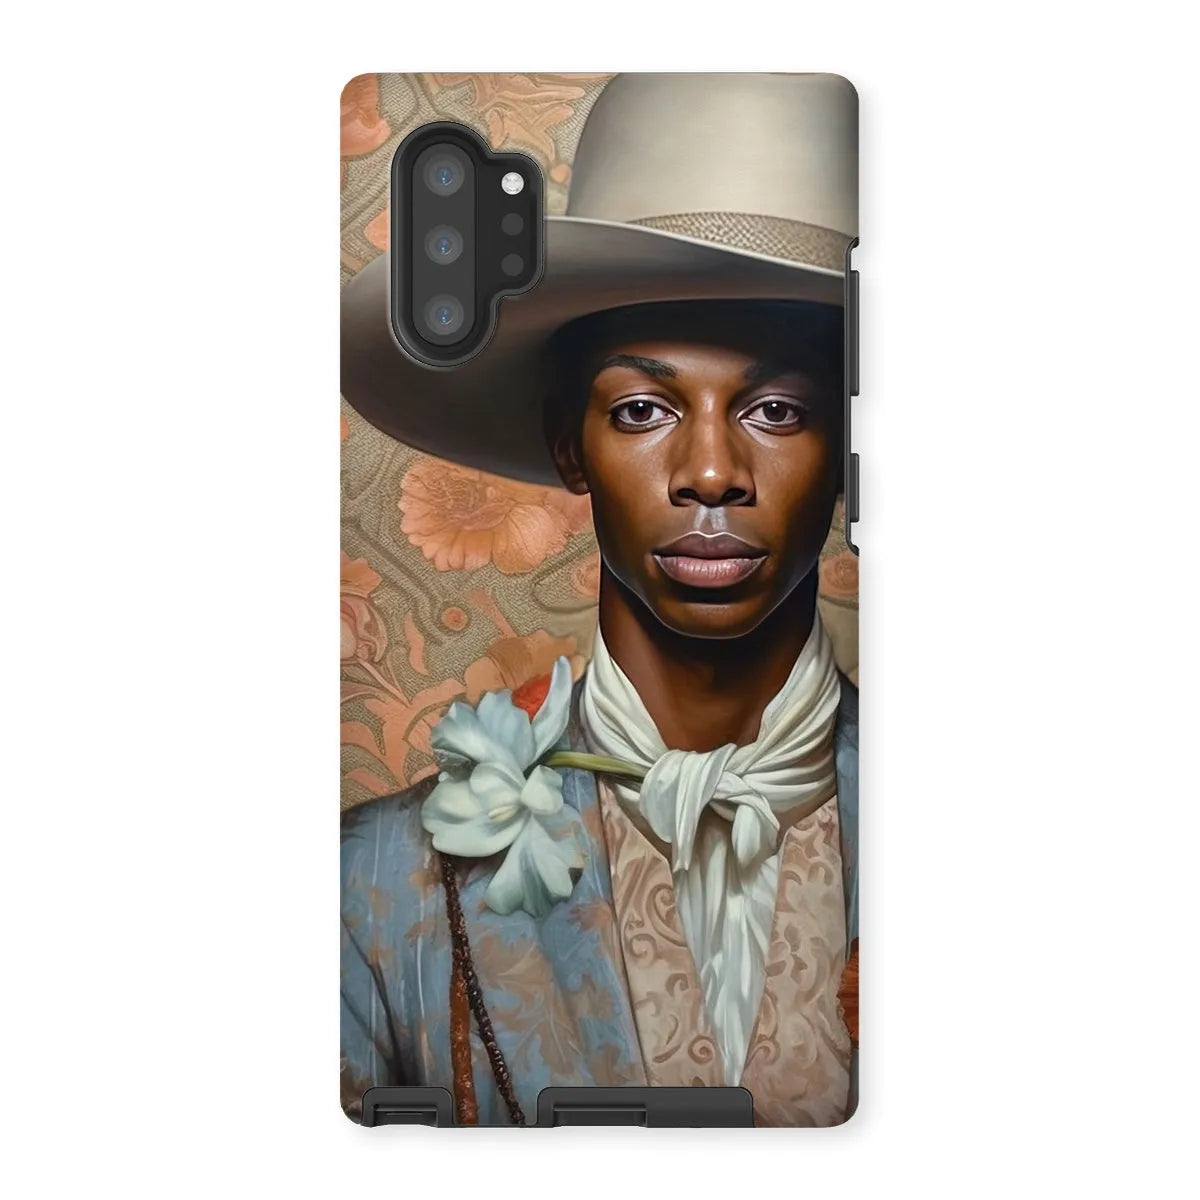 Apollo The Gay Cowboy - Gay Aesthetic Art Phone Case - Samsung Galaxy Note 10p / Matte - Mobile Phone Cases - Aesthetic